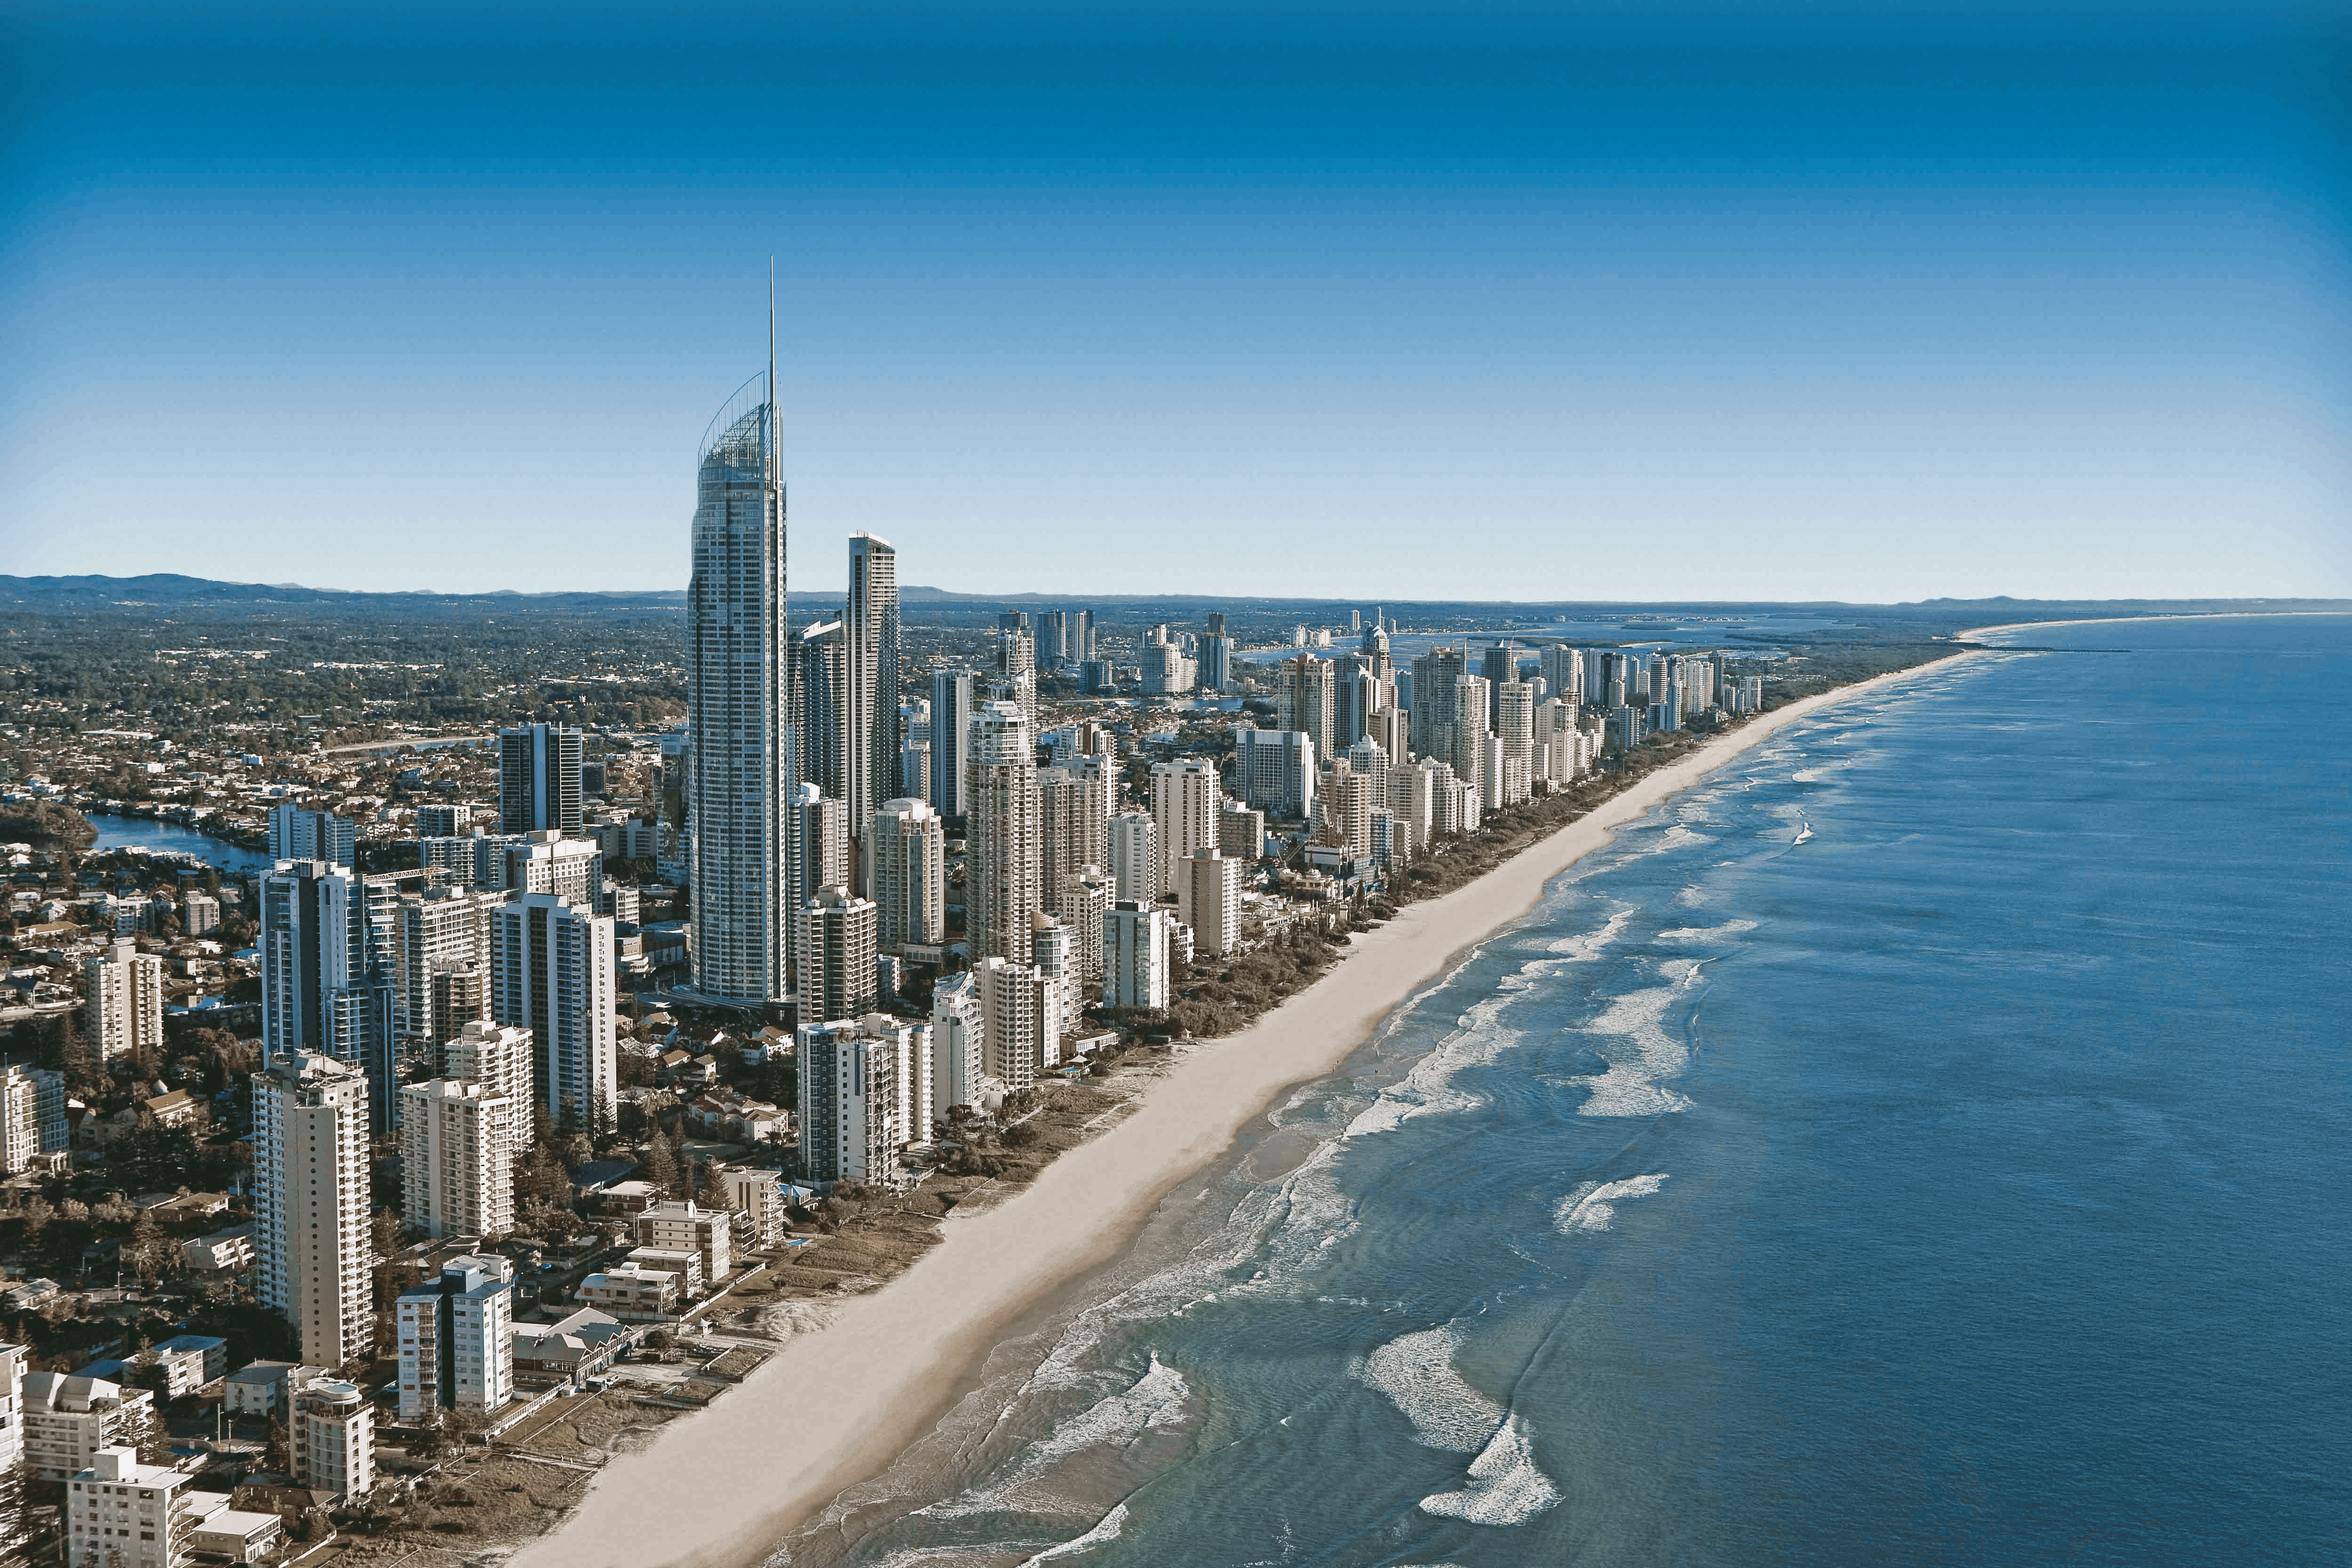 A picturesque view of Gold Coast's skyline and coastline